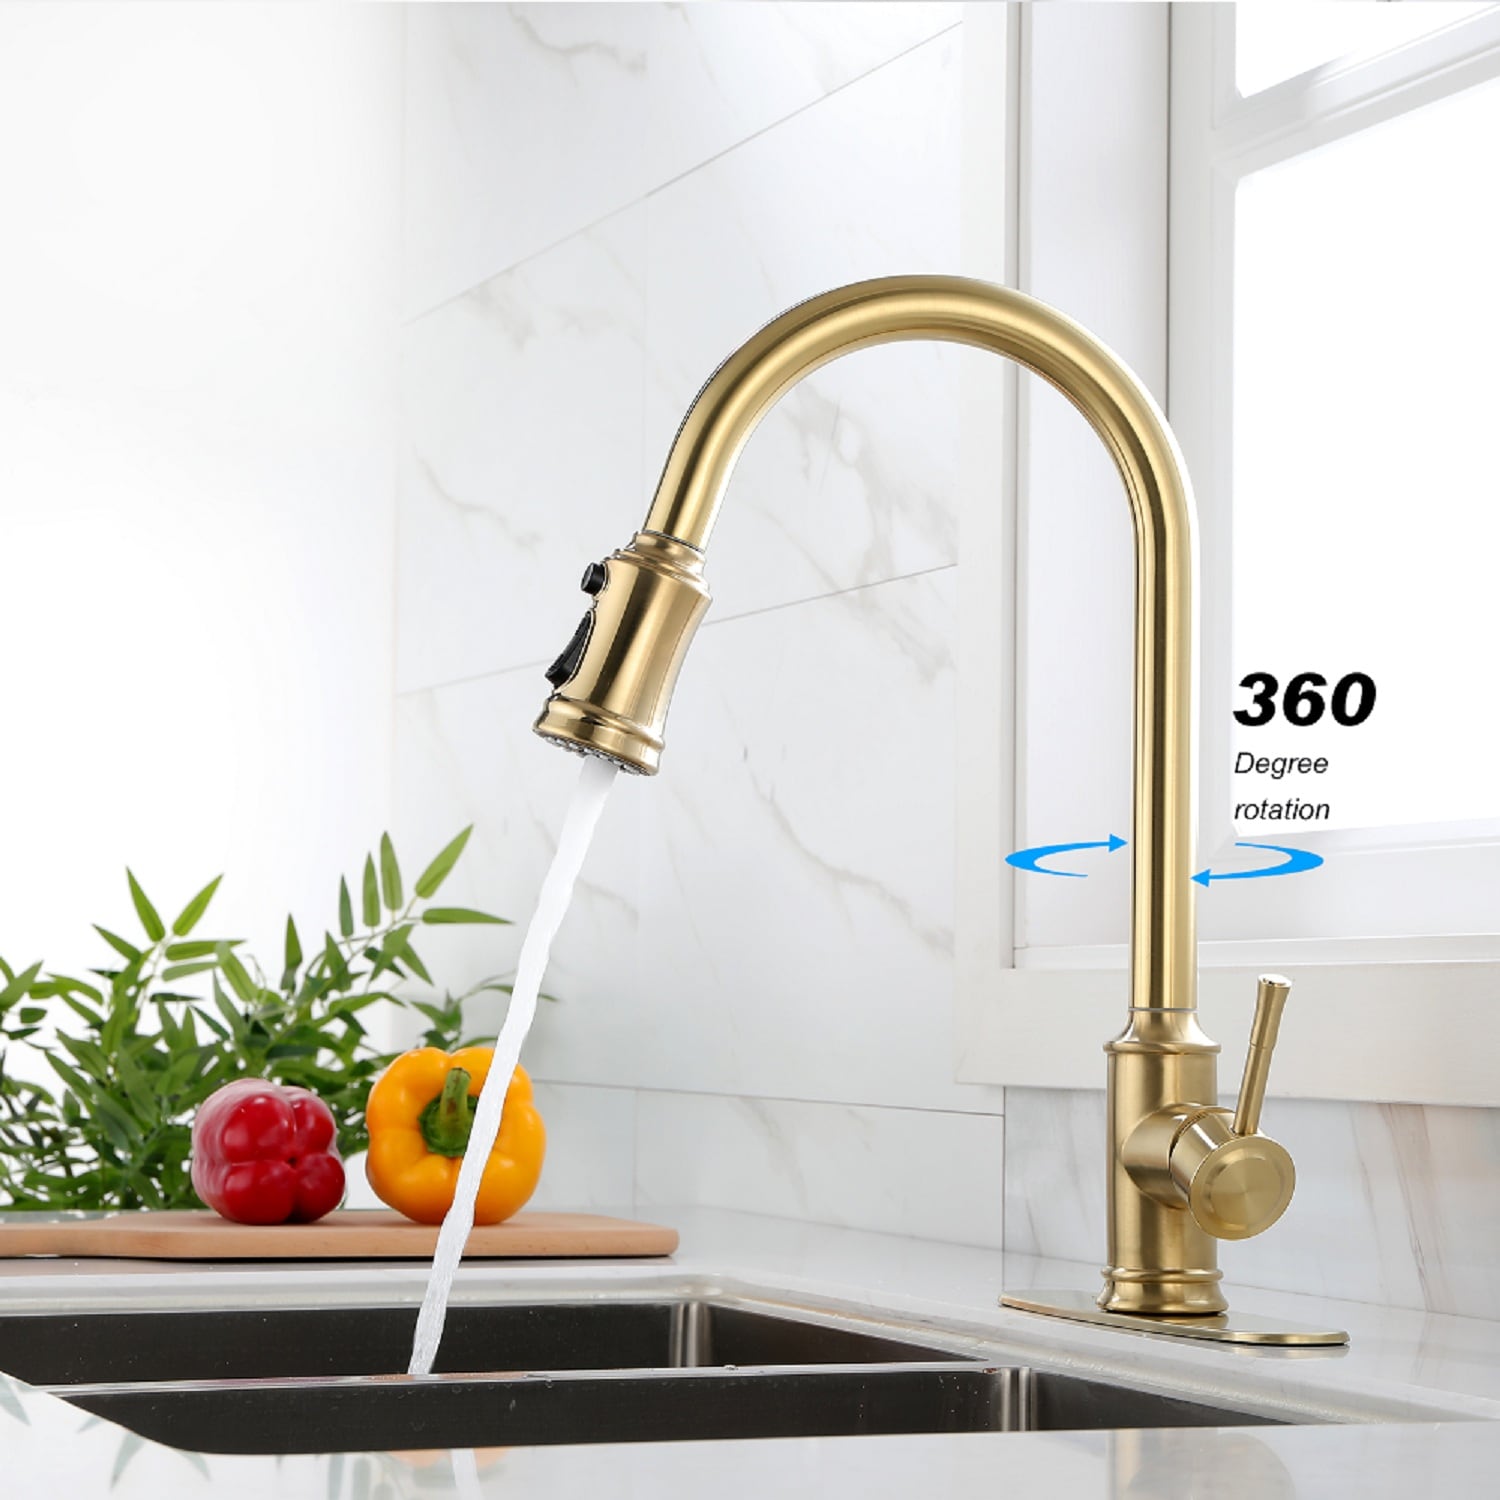 Clihome Gold Single Handle Pull-down Touch Kitchen Faucet with Deck Plate